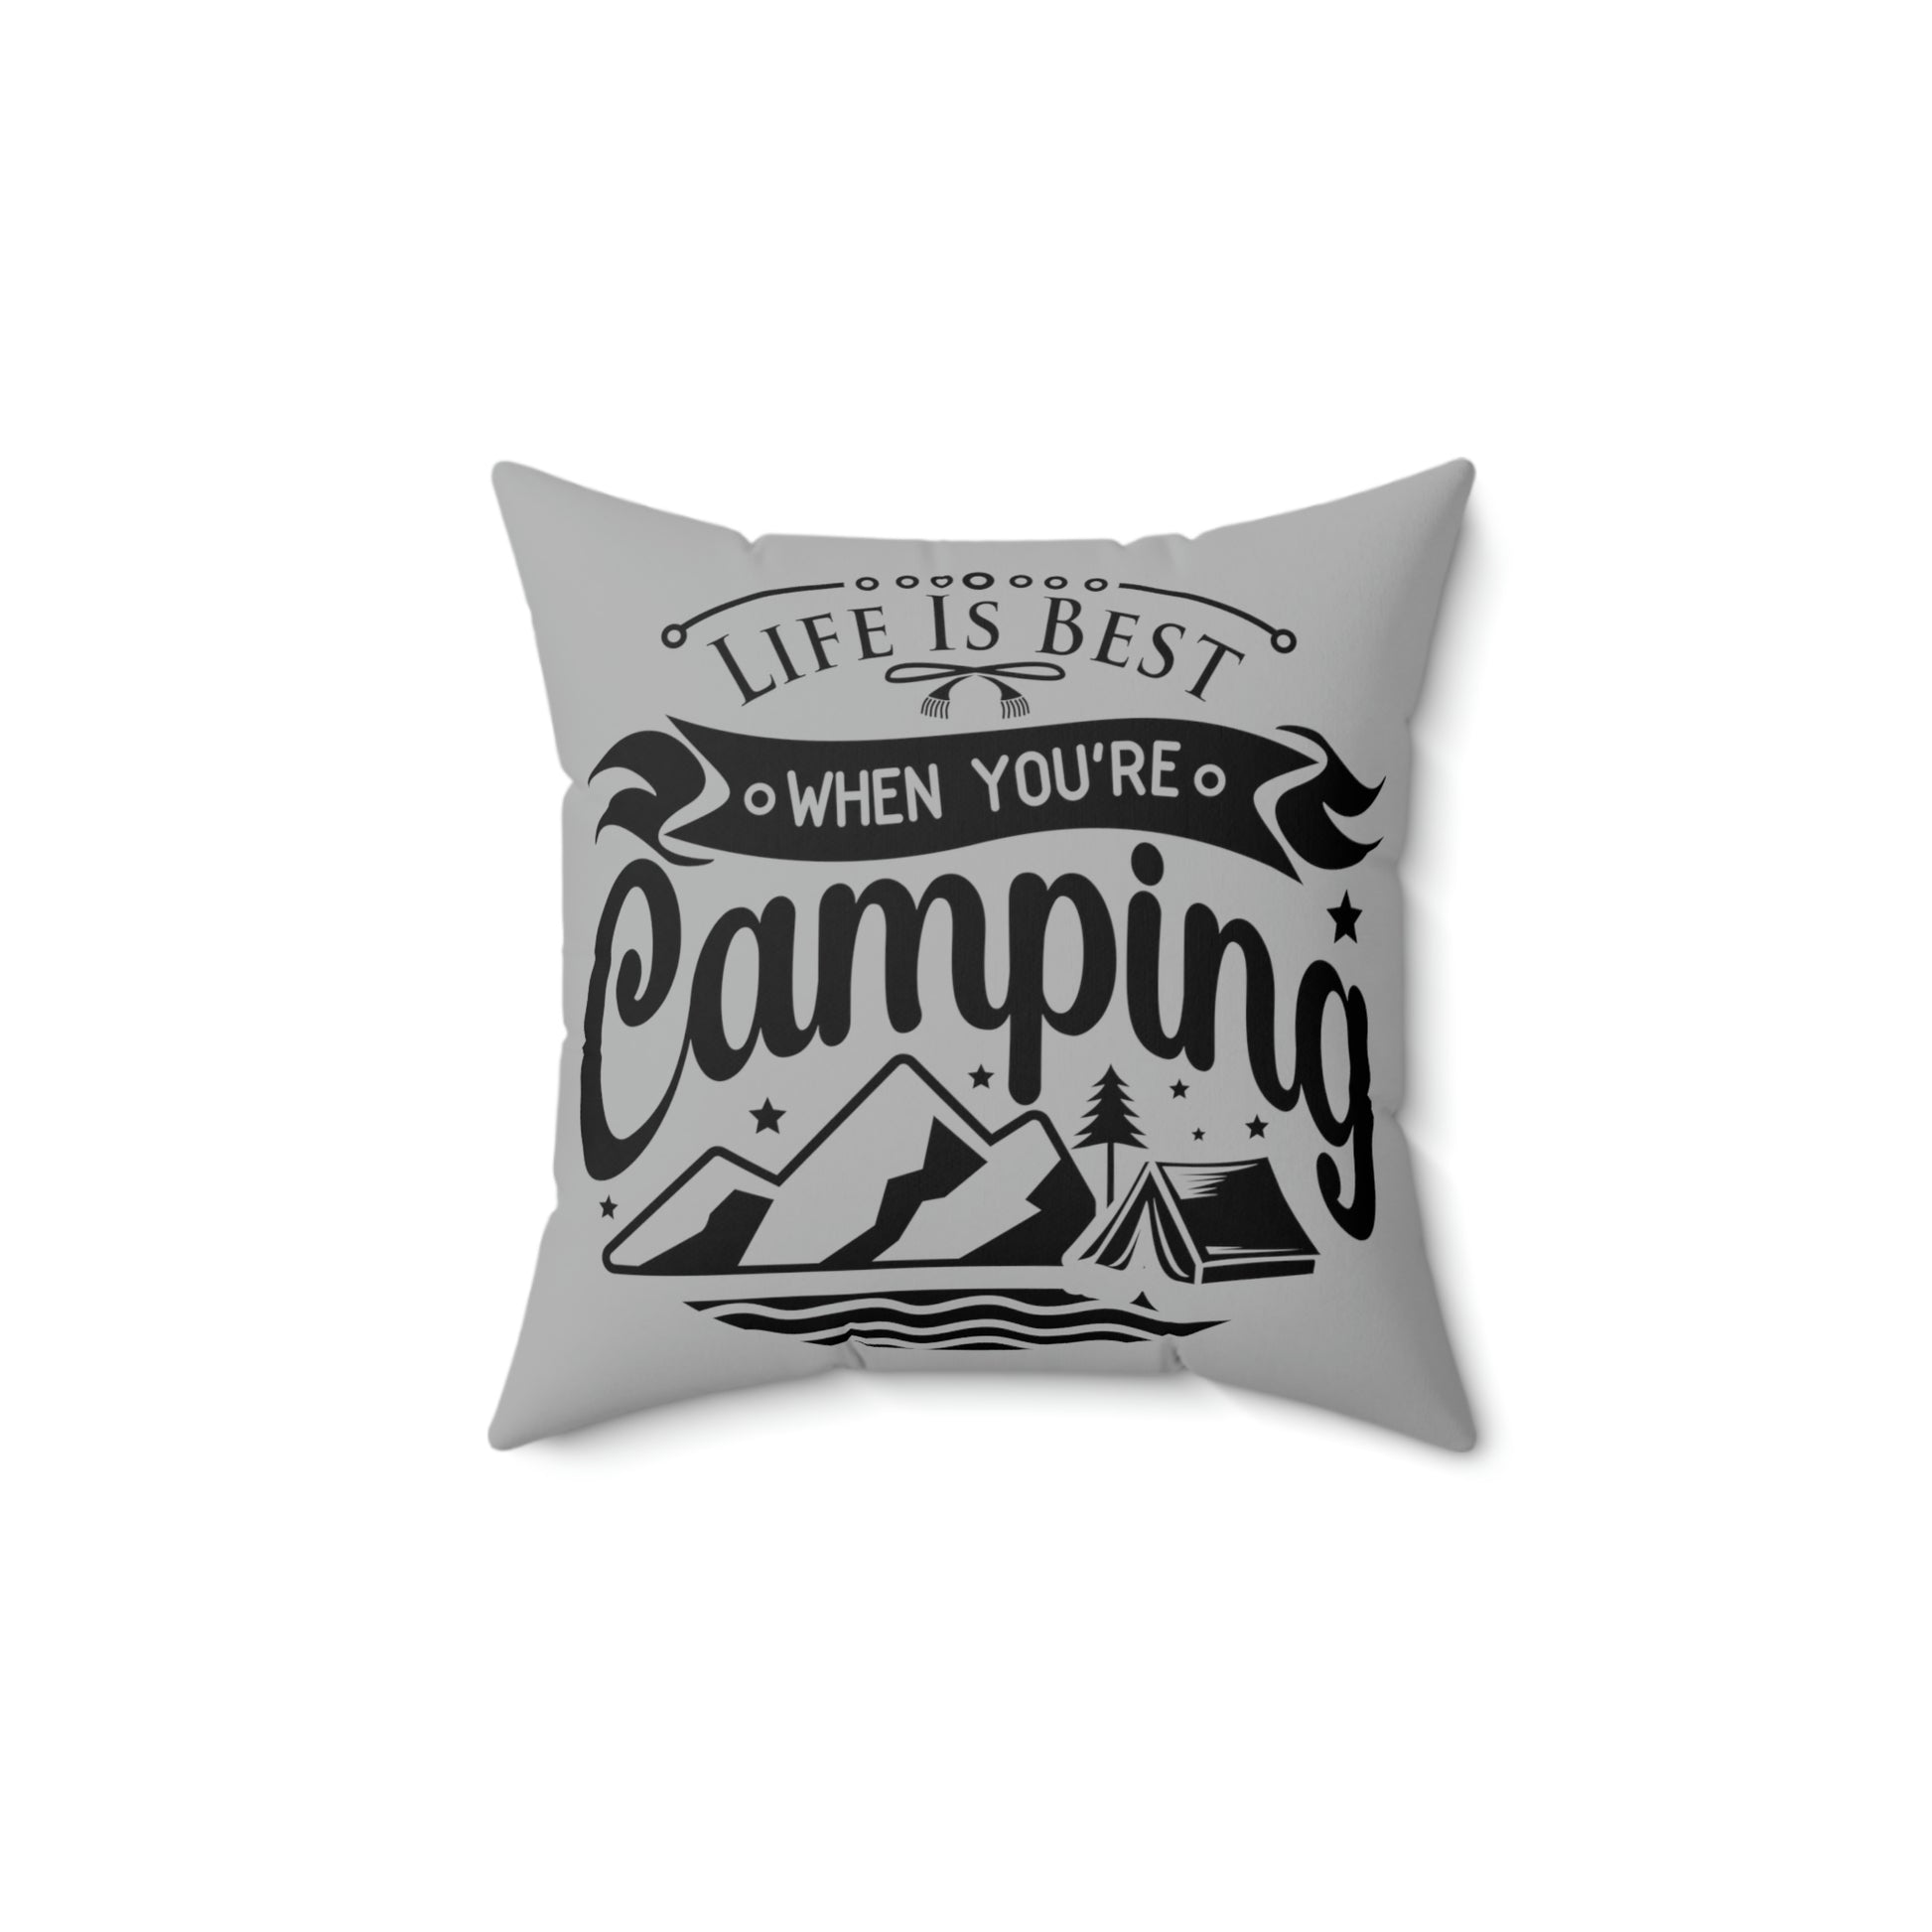 "Life Is Best When You're Camping" Throw Pillow - Weave Got Gifts - Unique Gifts You Won’t Find Anywhere Else!